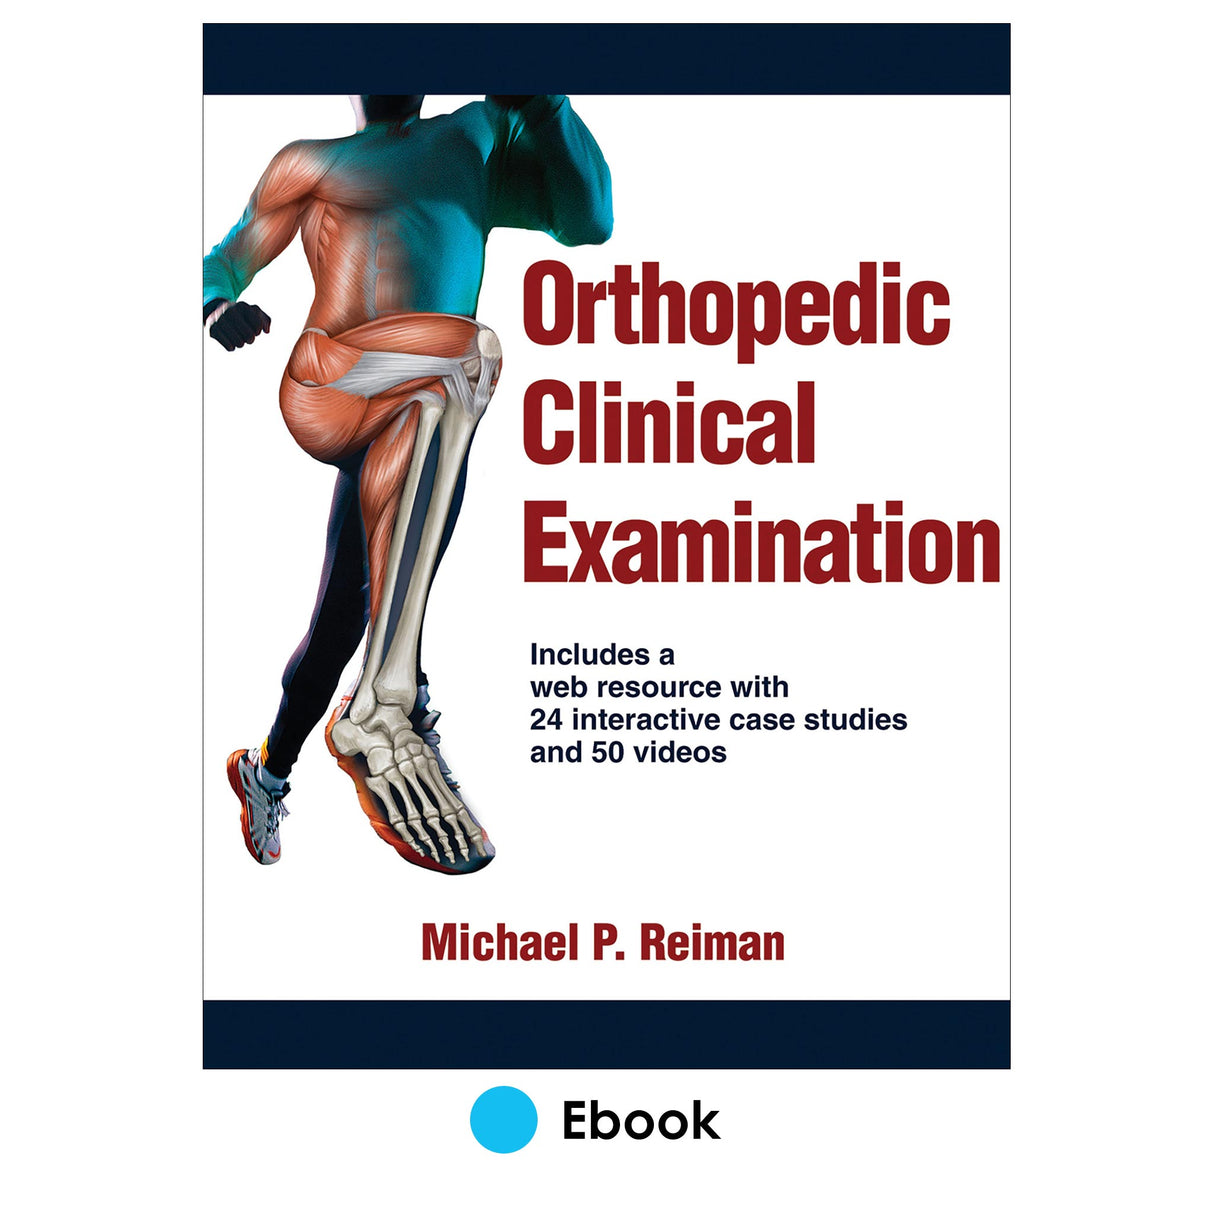 Orthopedic Clinical Examination PDF With Web Resource